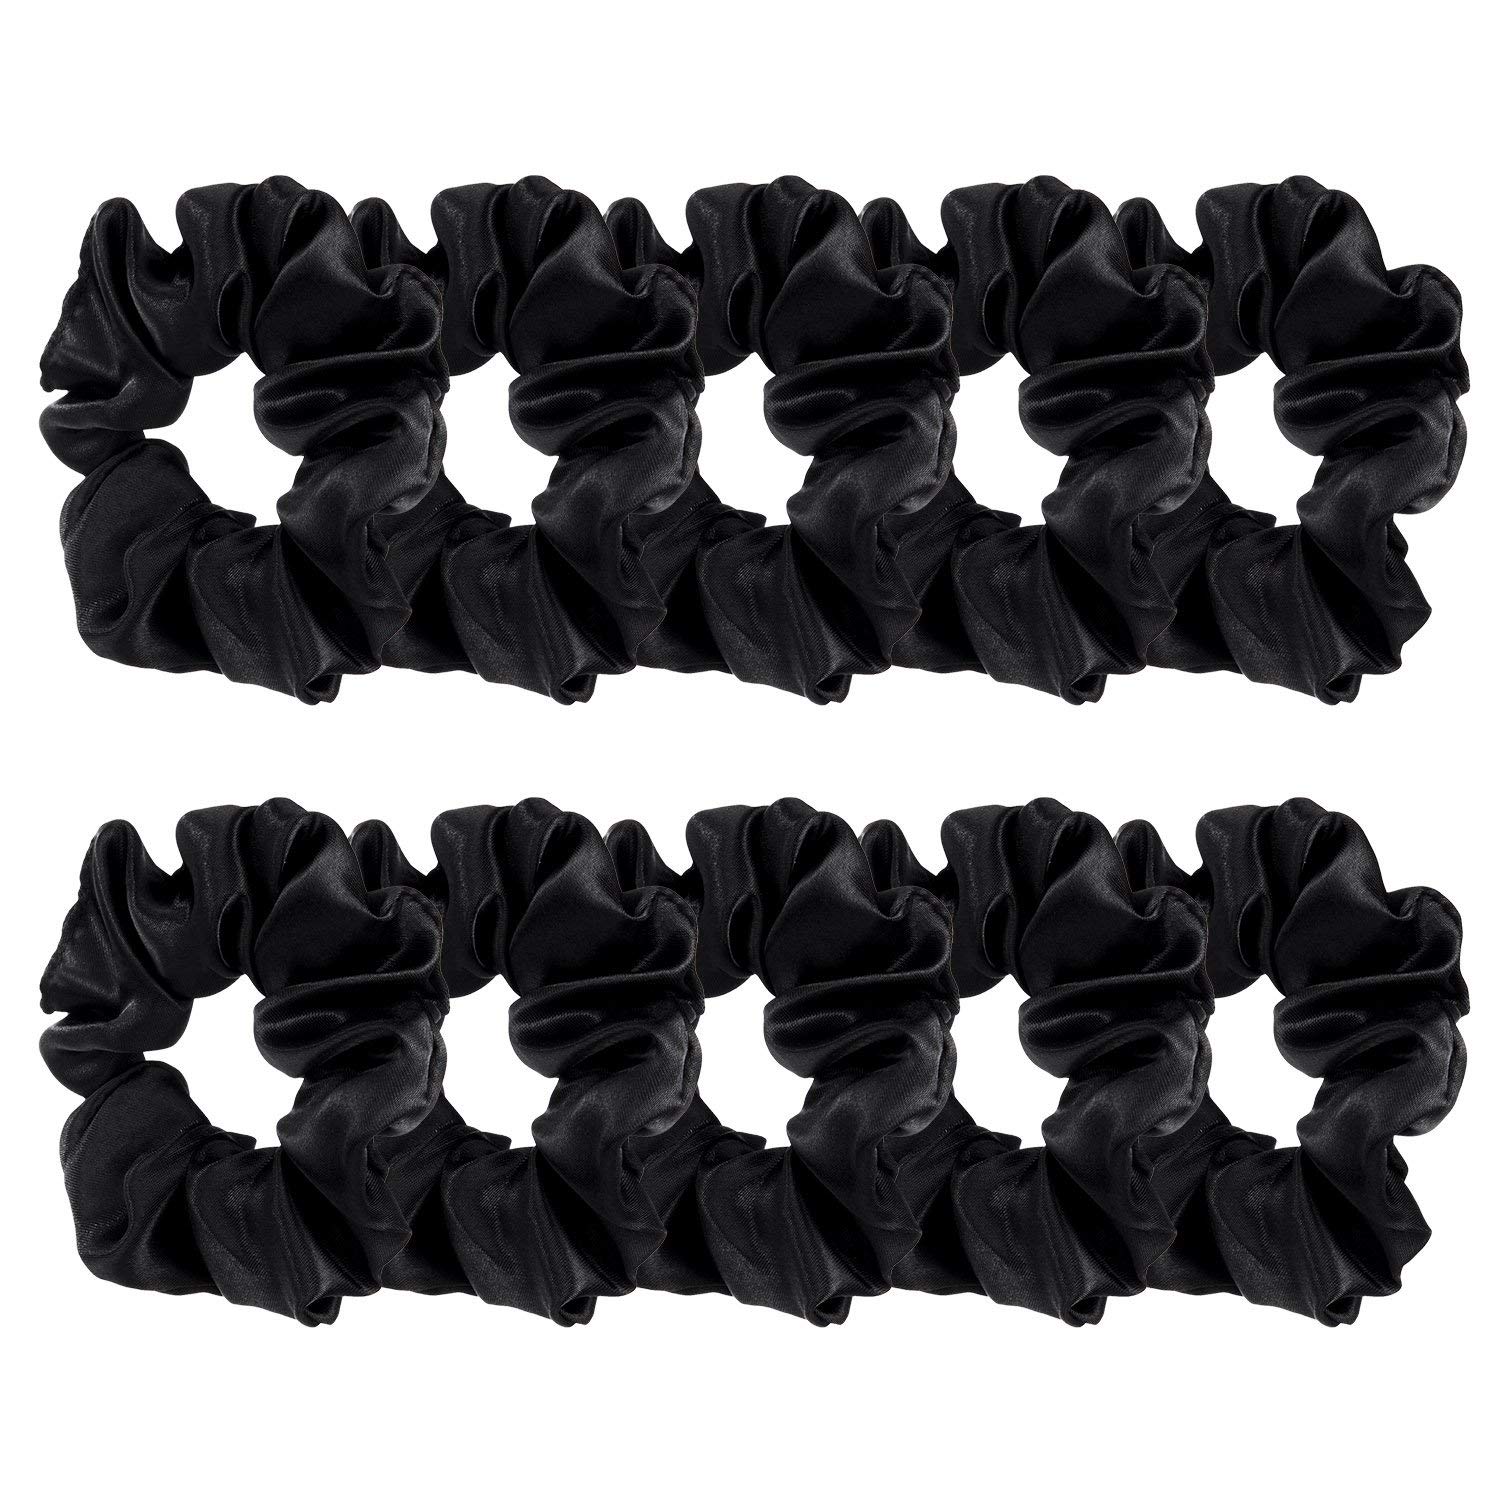 10 Pieces Satin Scrunchies Hair Ties Silky Small Elastic Hair Bobbles Ponytail Holders Curly Hair Accessories for Women Girls Kids Adults (Black)